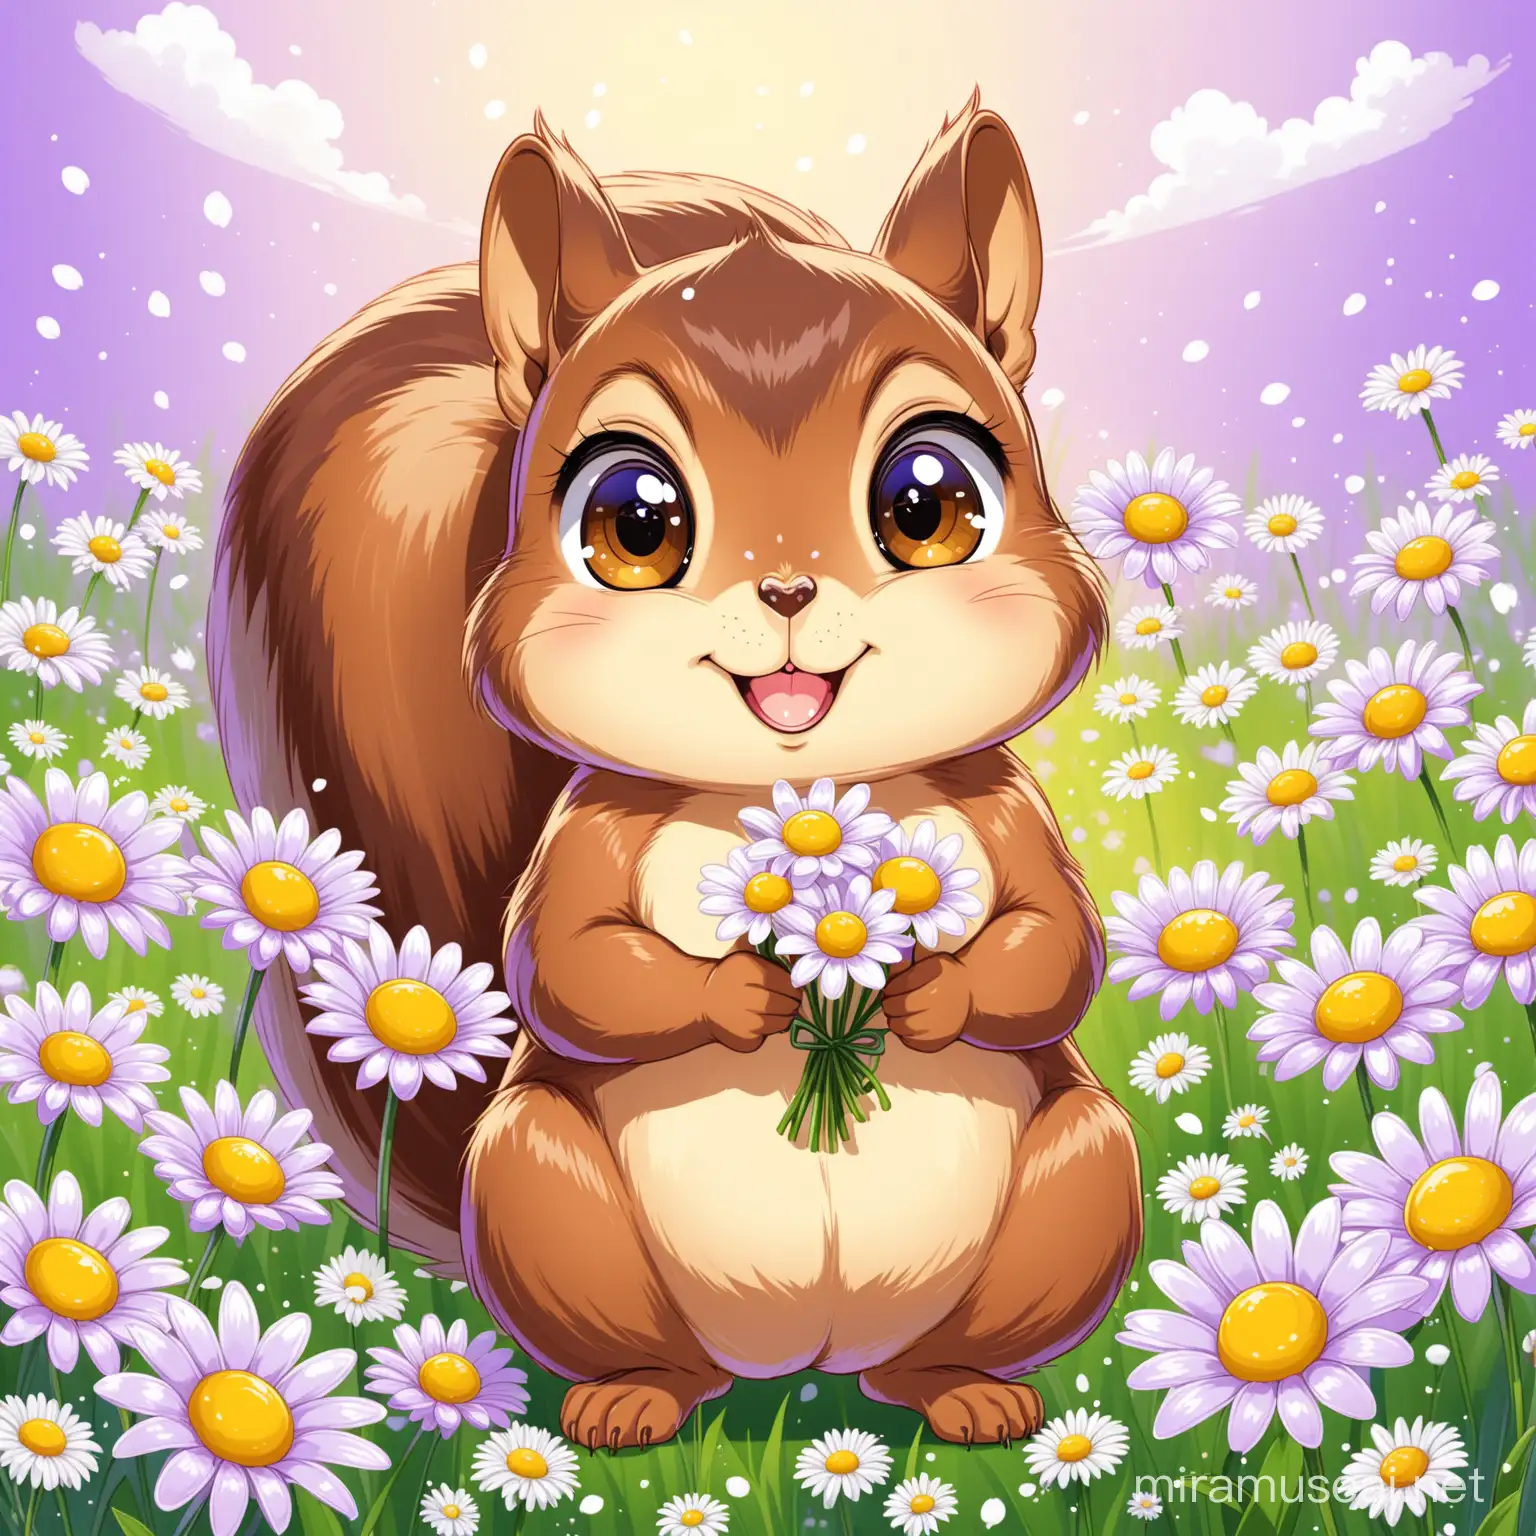 Big eyed squirrel with big cheeks holding daisies in a field of daisies  lavender background 